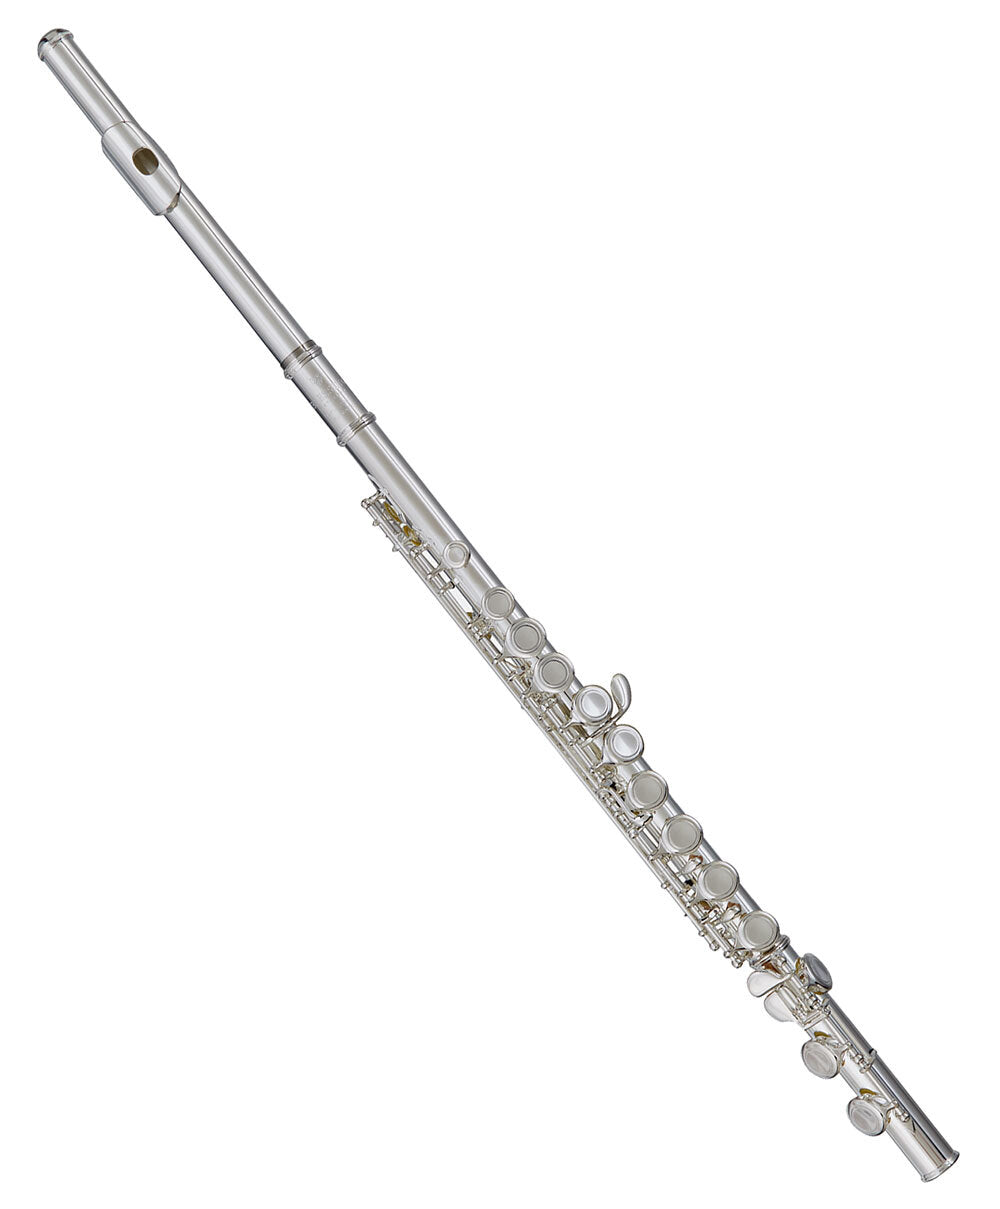 Blessing BFL-1287 Flute (C) in Silver Plated Finish